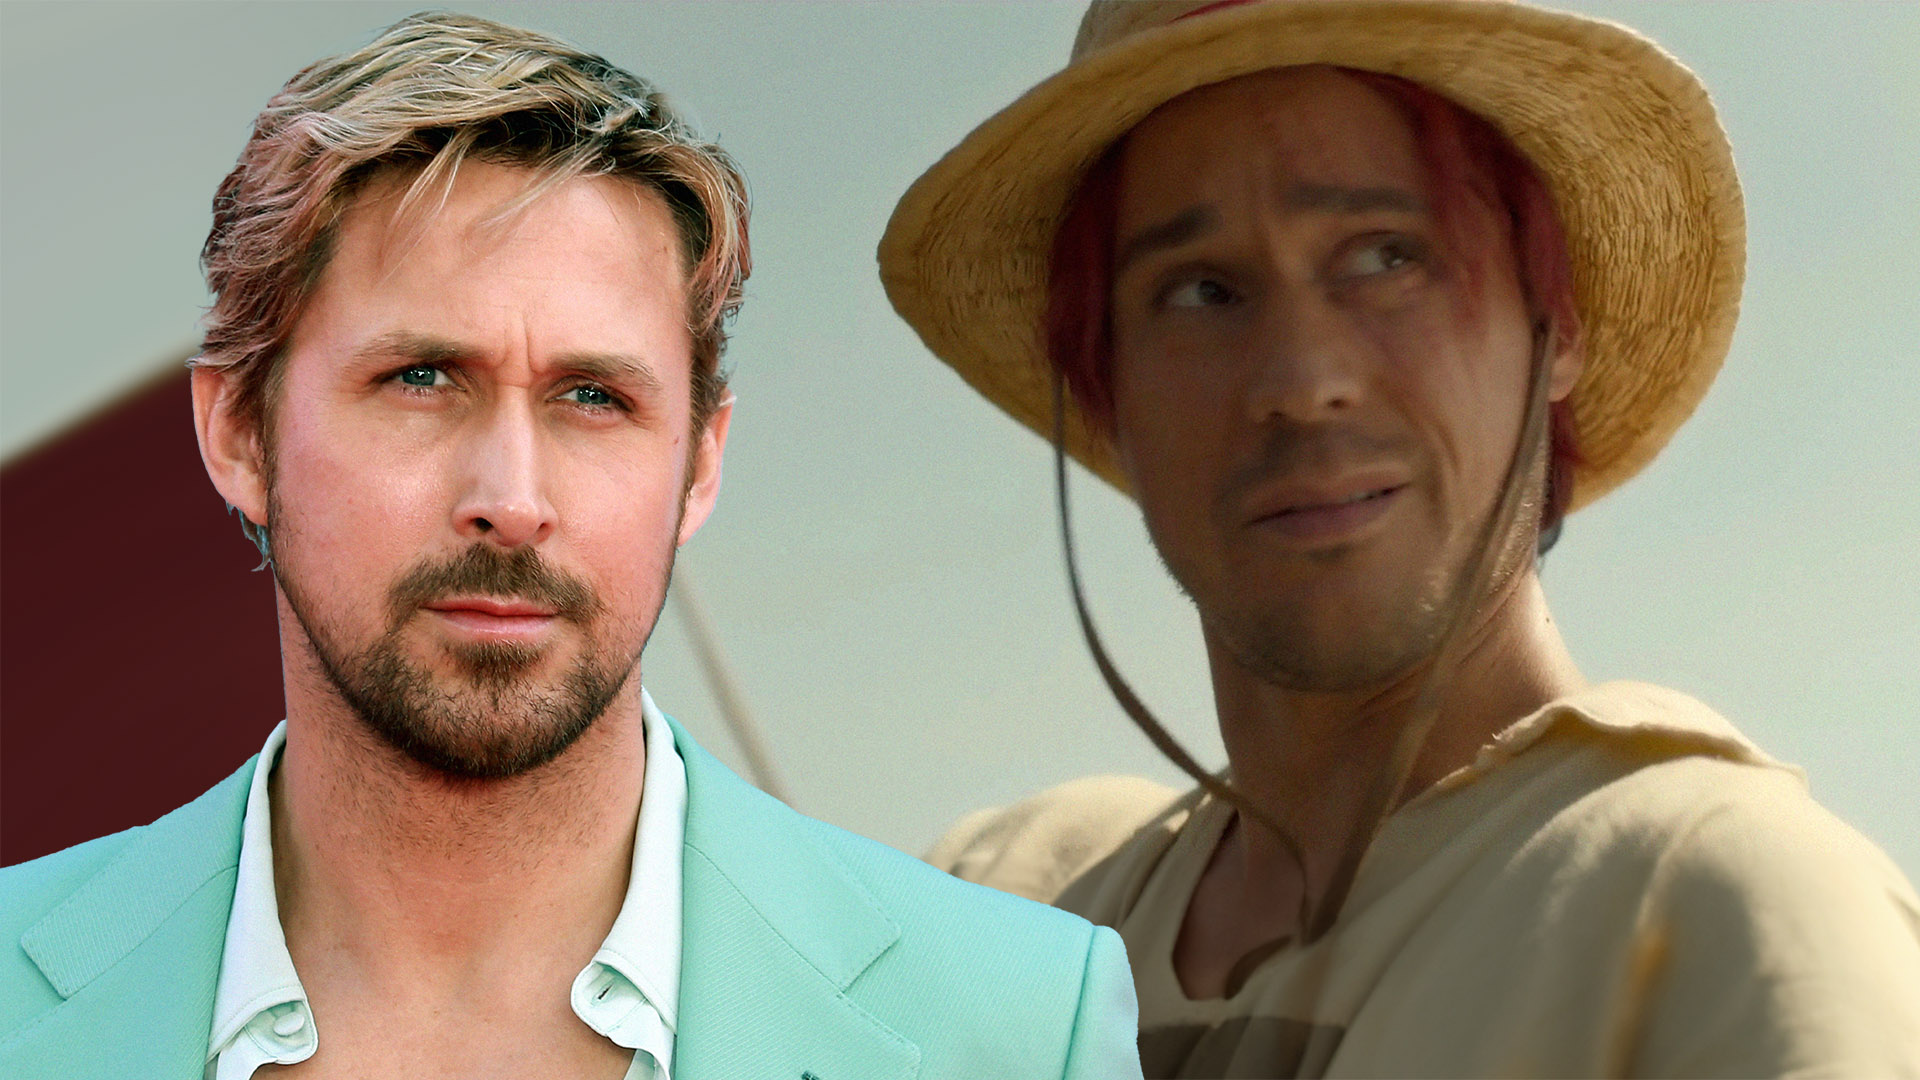 Thought One Piece's Shanks Looks Like Gosling? You're Not Alone